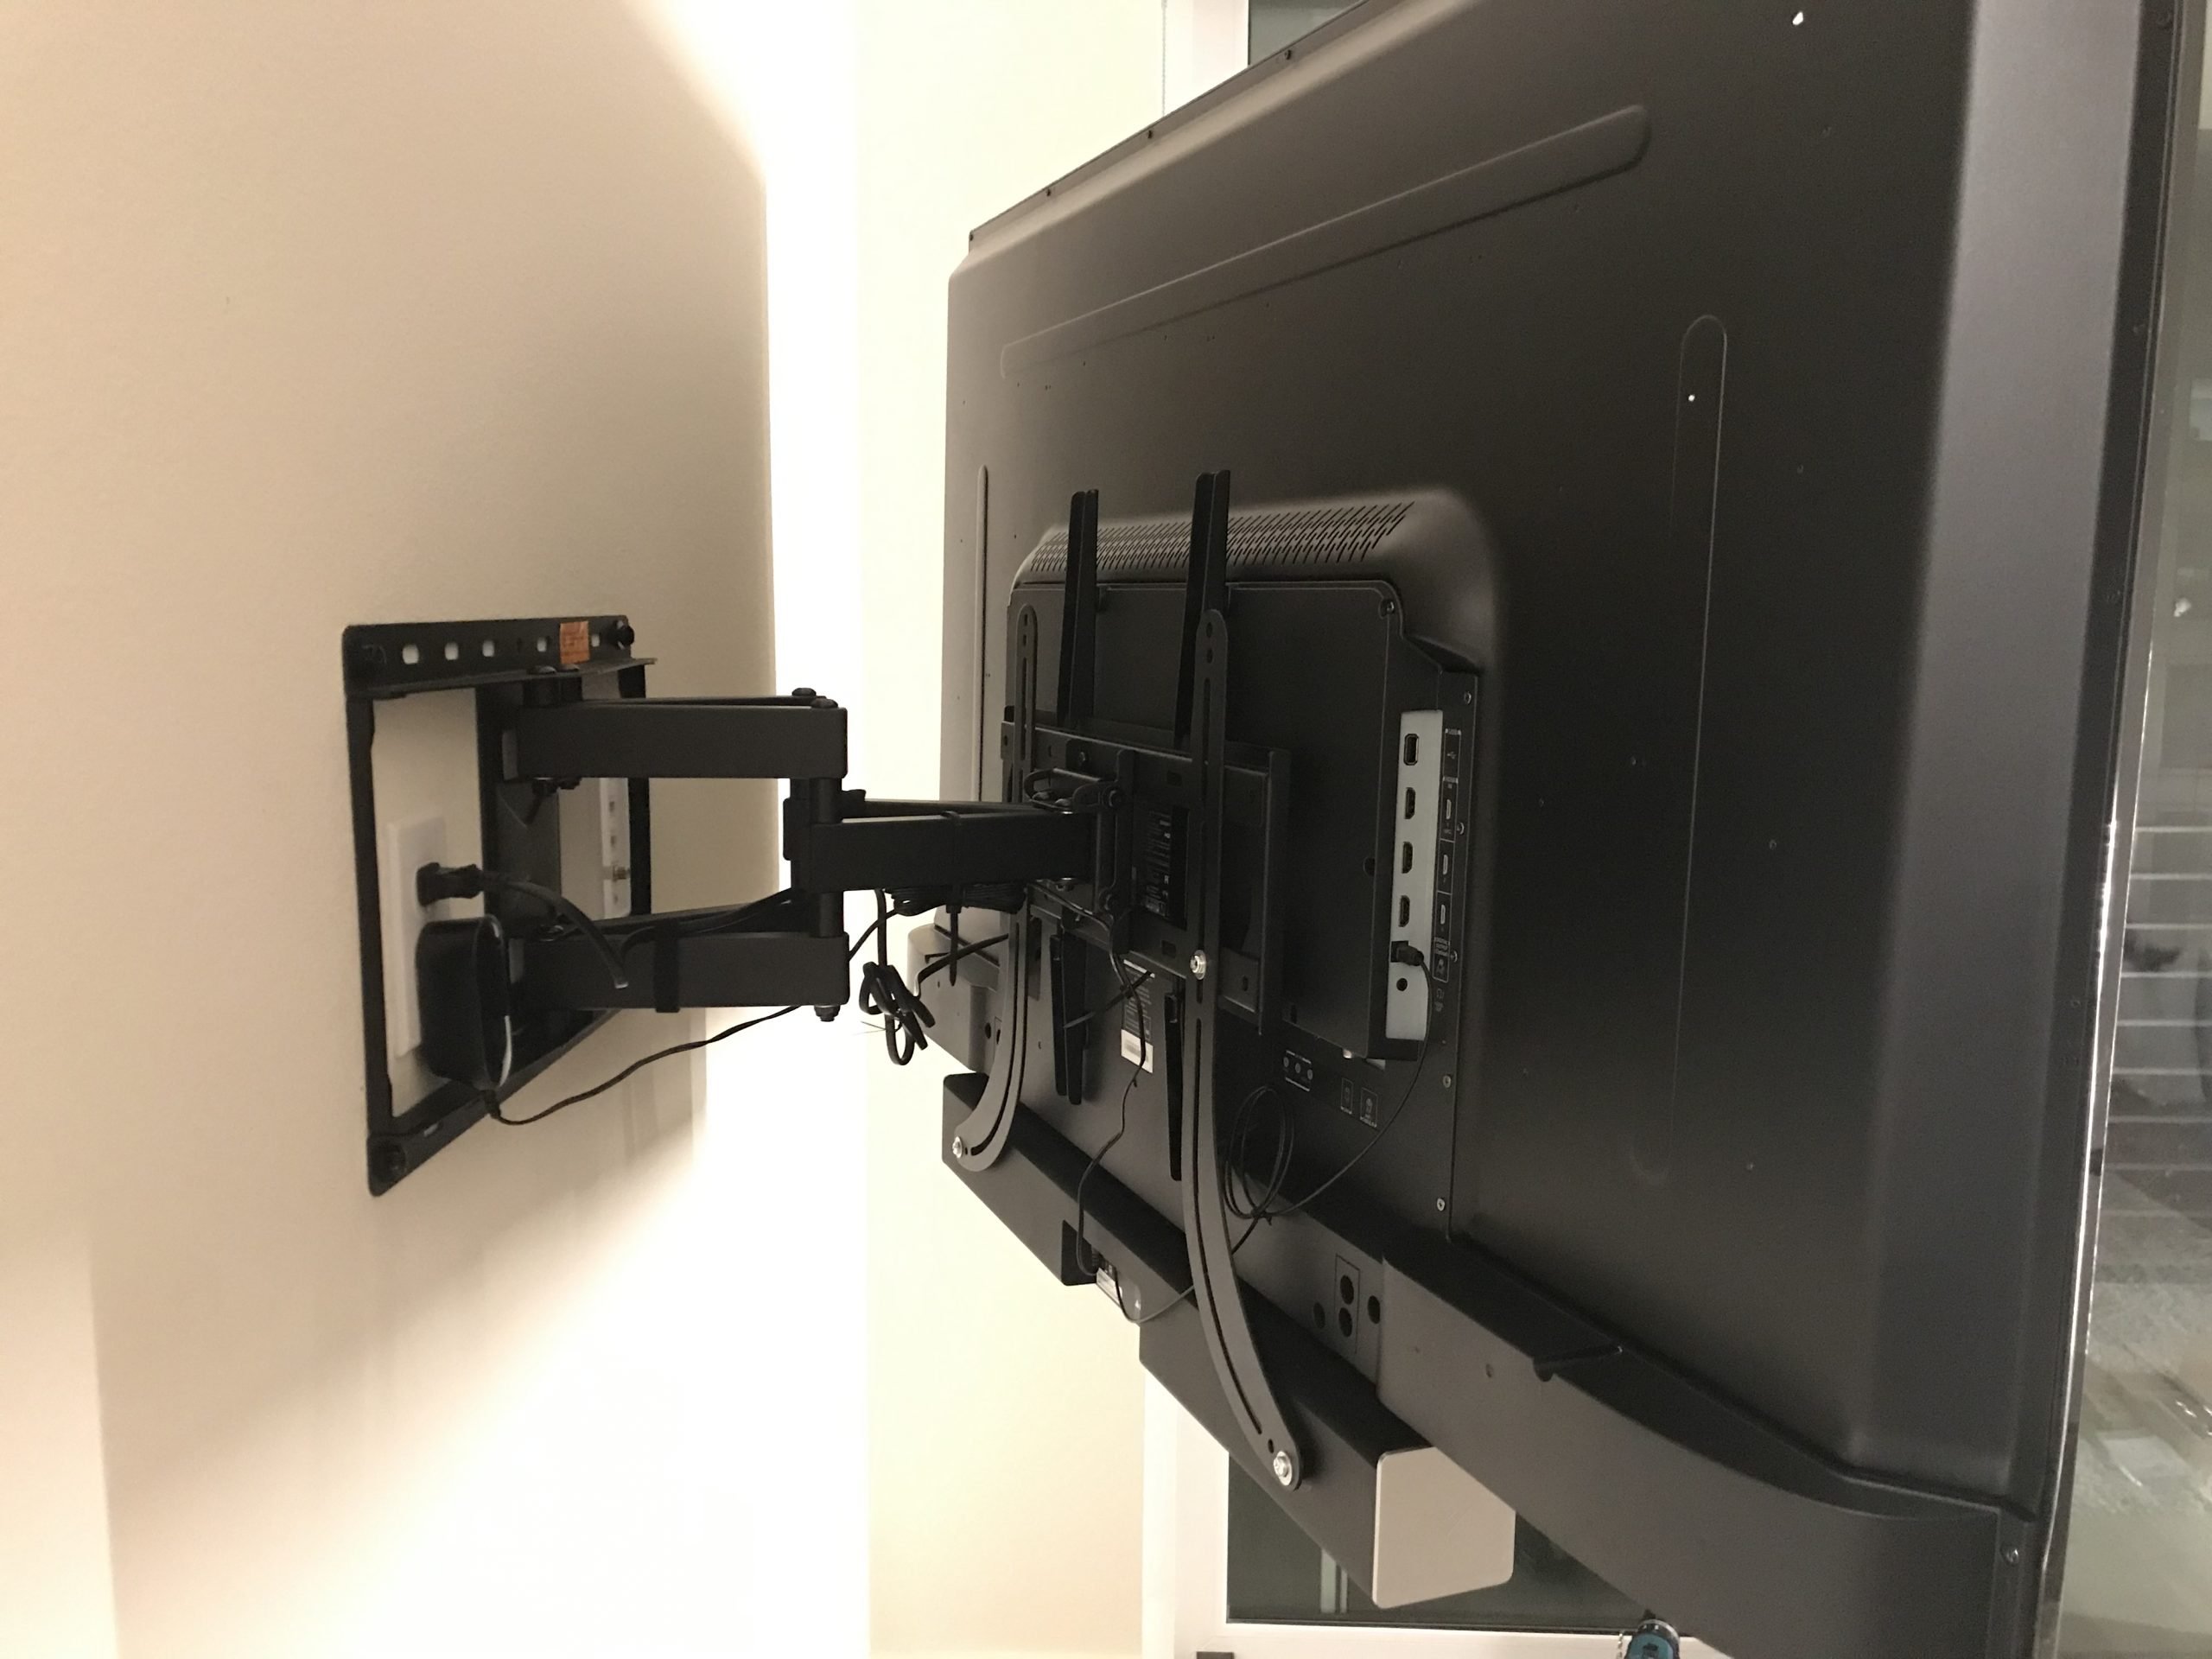 What Style TV Mount Should I Use? (And Why)